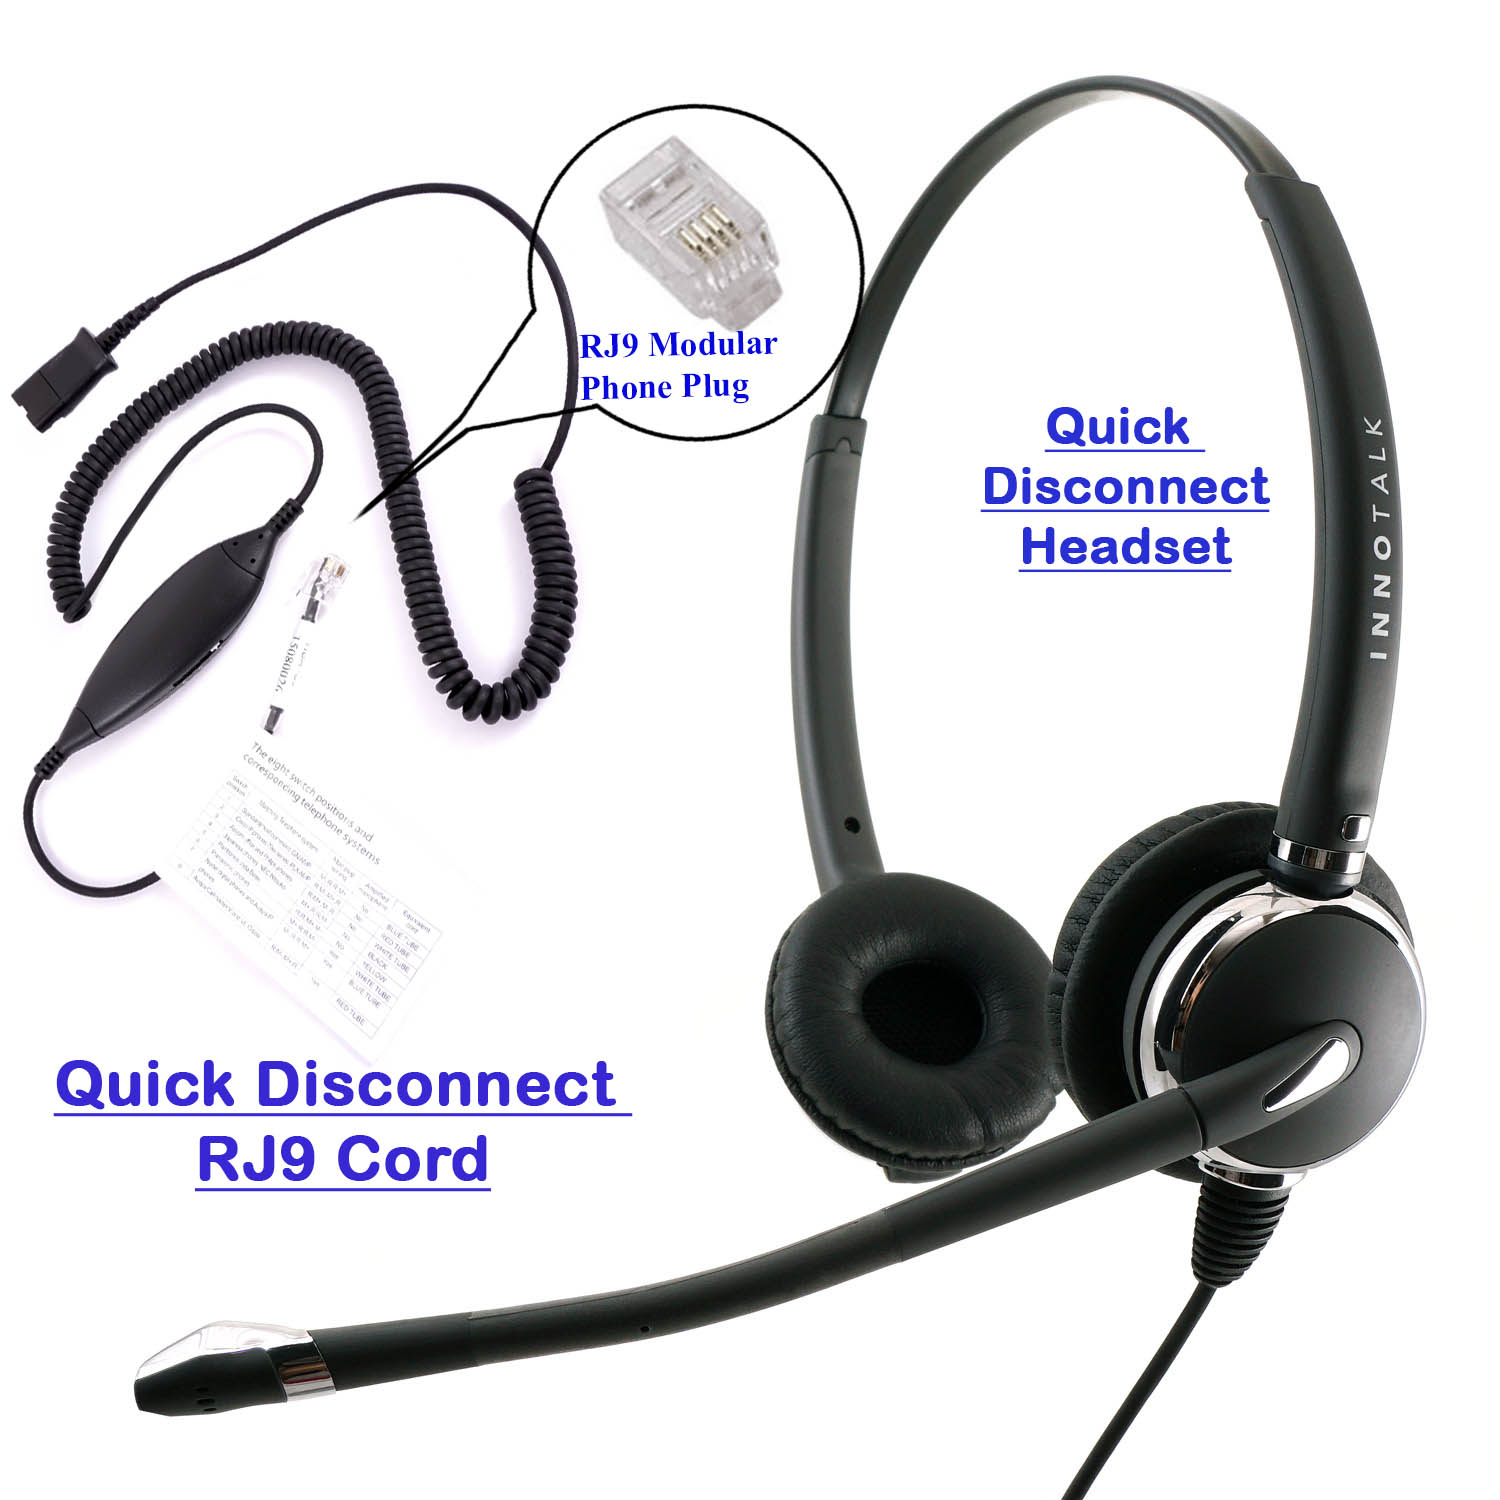 RJ9 Phone Headset - Plantronics Compatible QD Headset + Virtual Compatibility Smart Adapter for Cisco Avaya Nec and Most Phones - image 1 of 8